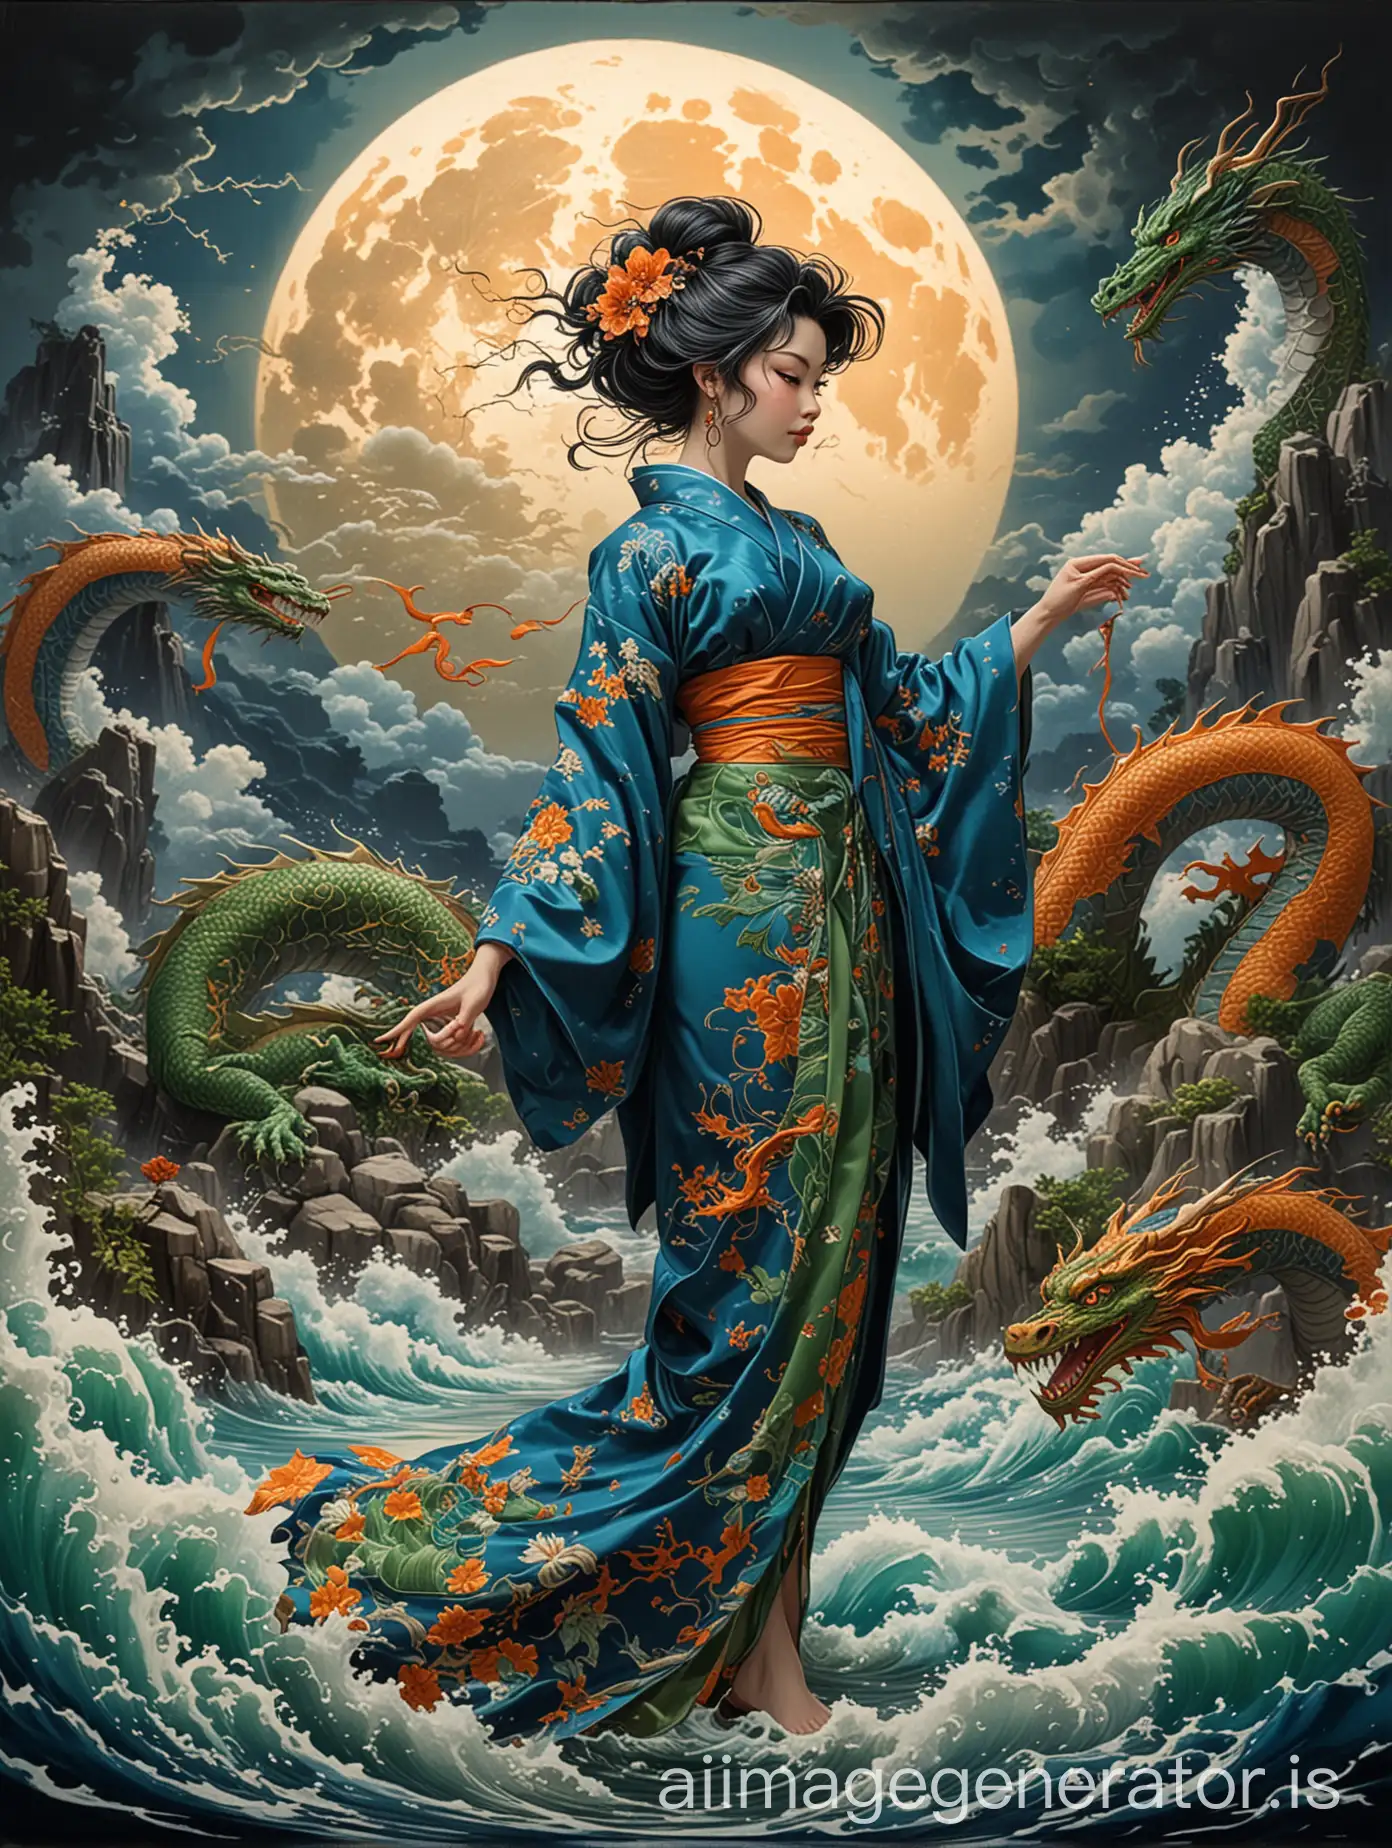 Ralph Bakshi heavy influenced style, woman graceful posing, in blue kimono with intricate  green and orange embroidery, facing a dragon, emerging from water, embracing a japanese style dragon with blue and green scales, fullmoon in the background, billowed stormy clouds